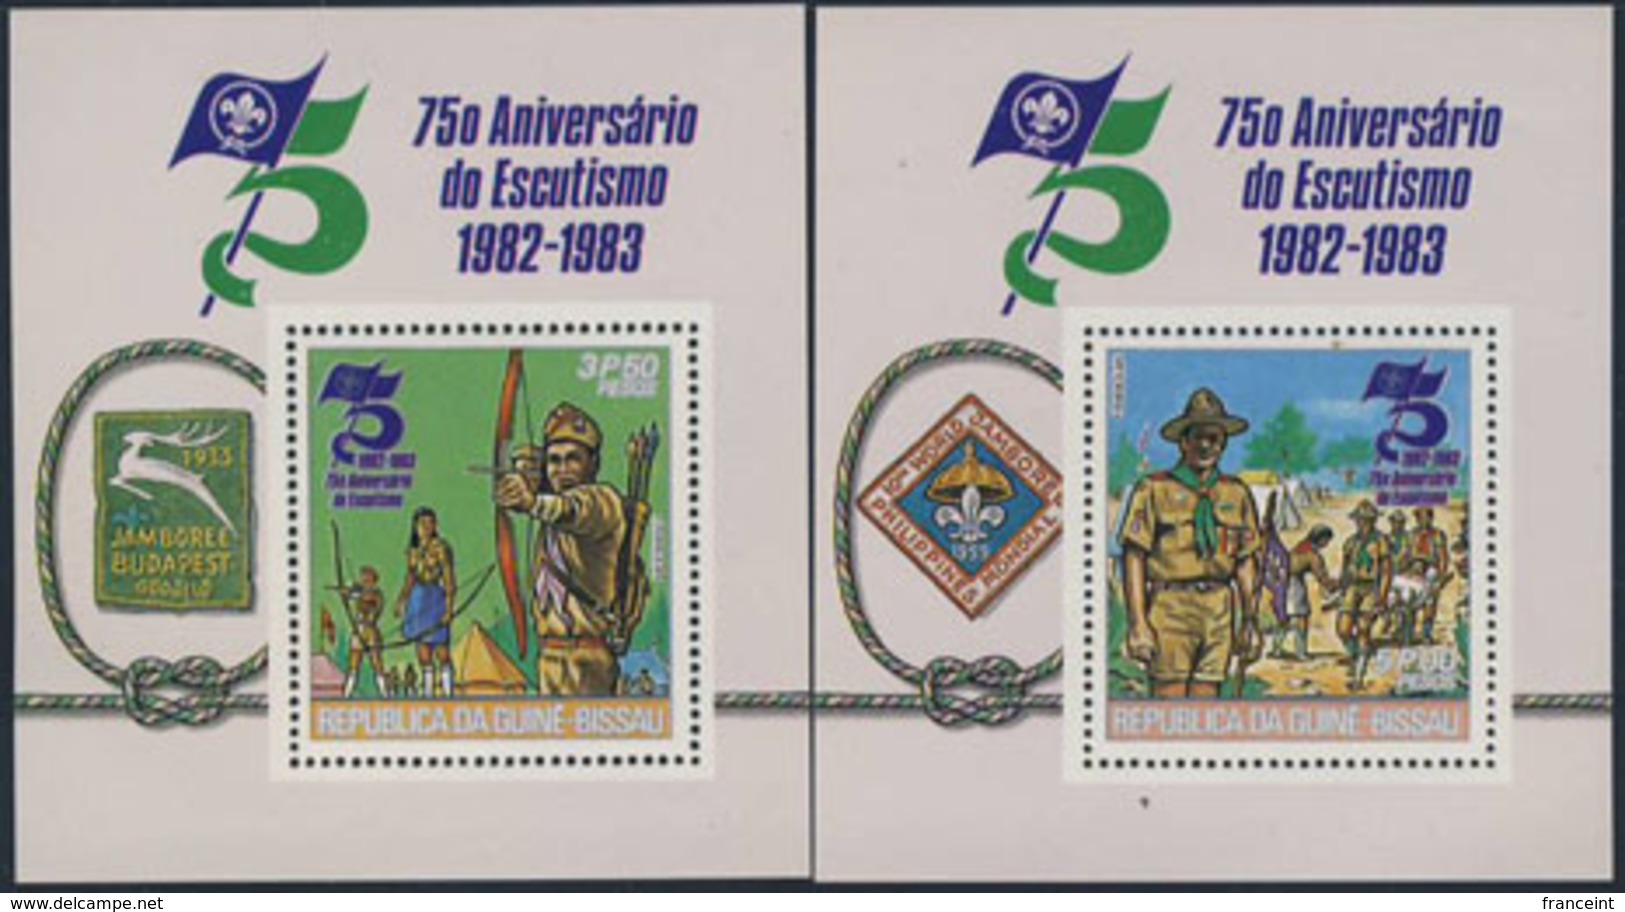 GUINEA-BISSAU (1982) Scouts In Various Activities. S/S, 75th Anniversary Of Scouting. Scott Nos 428-31,C41-3. - Guinea-Bissau